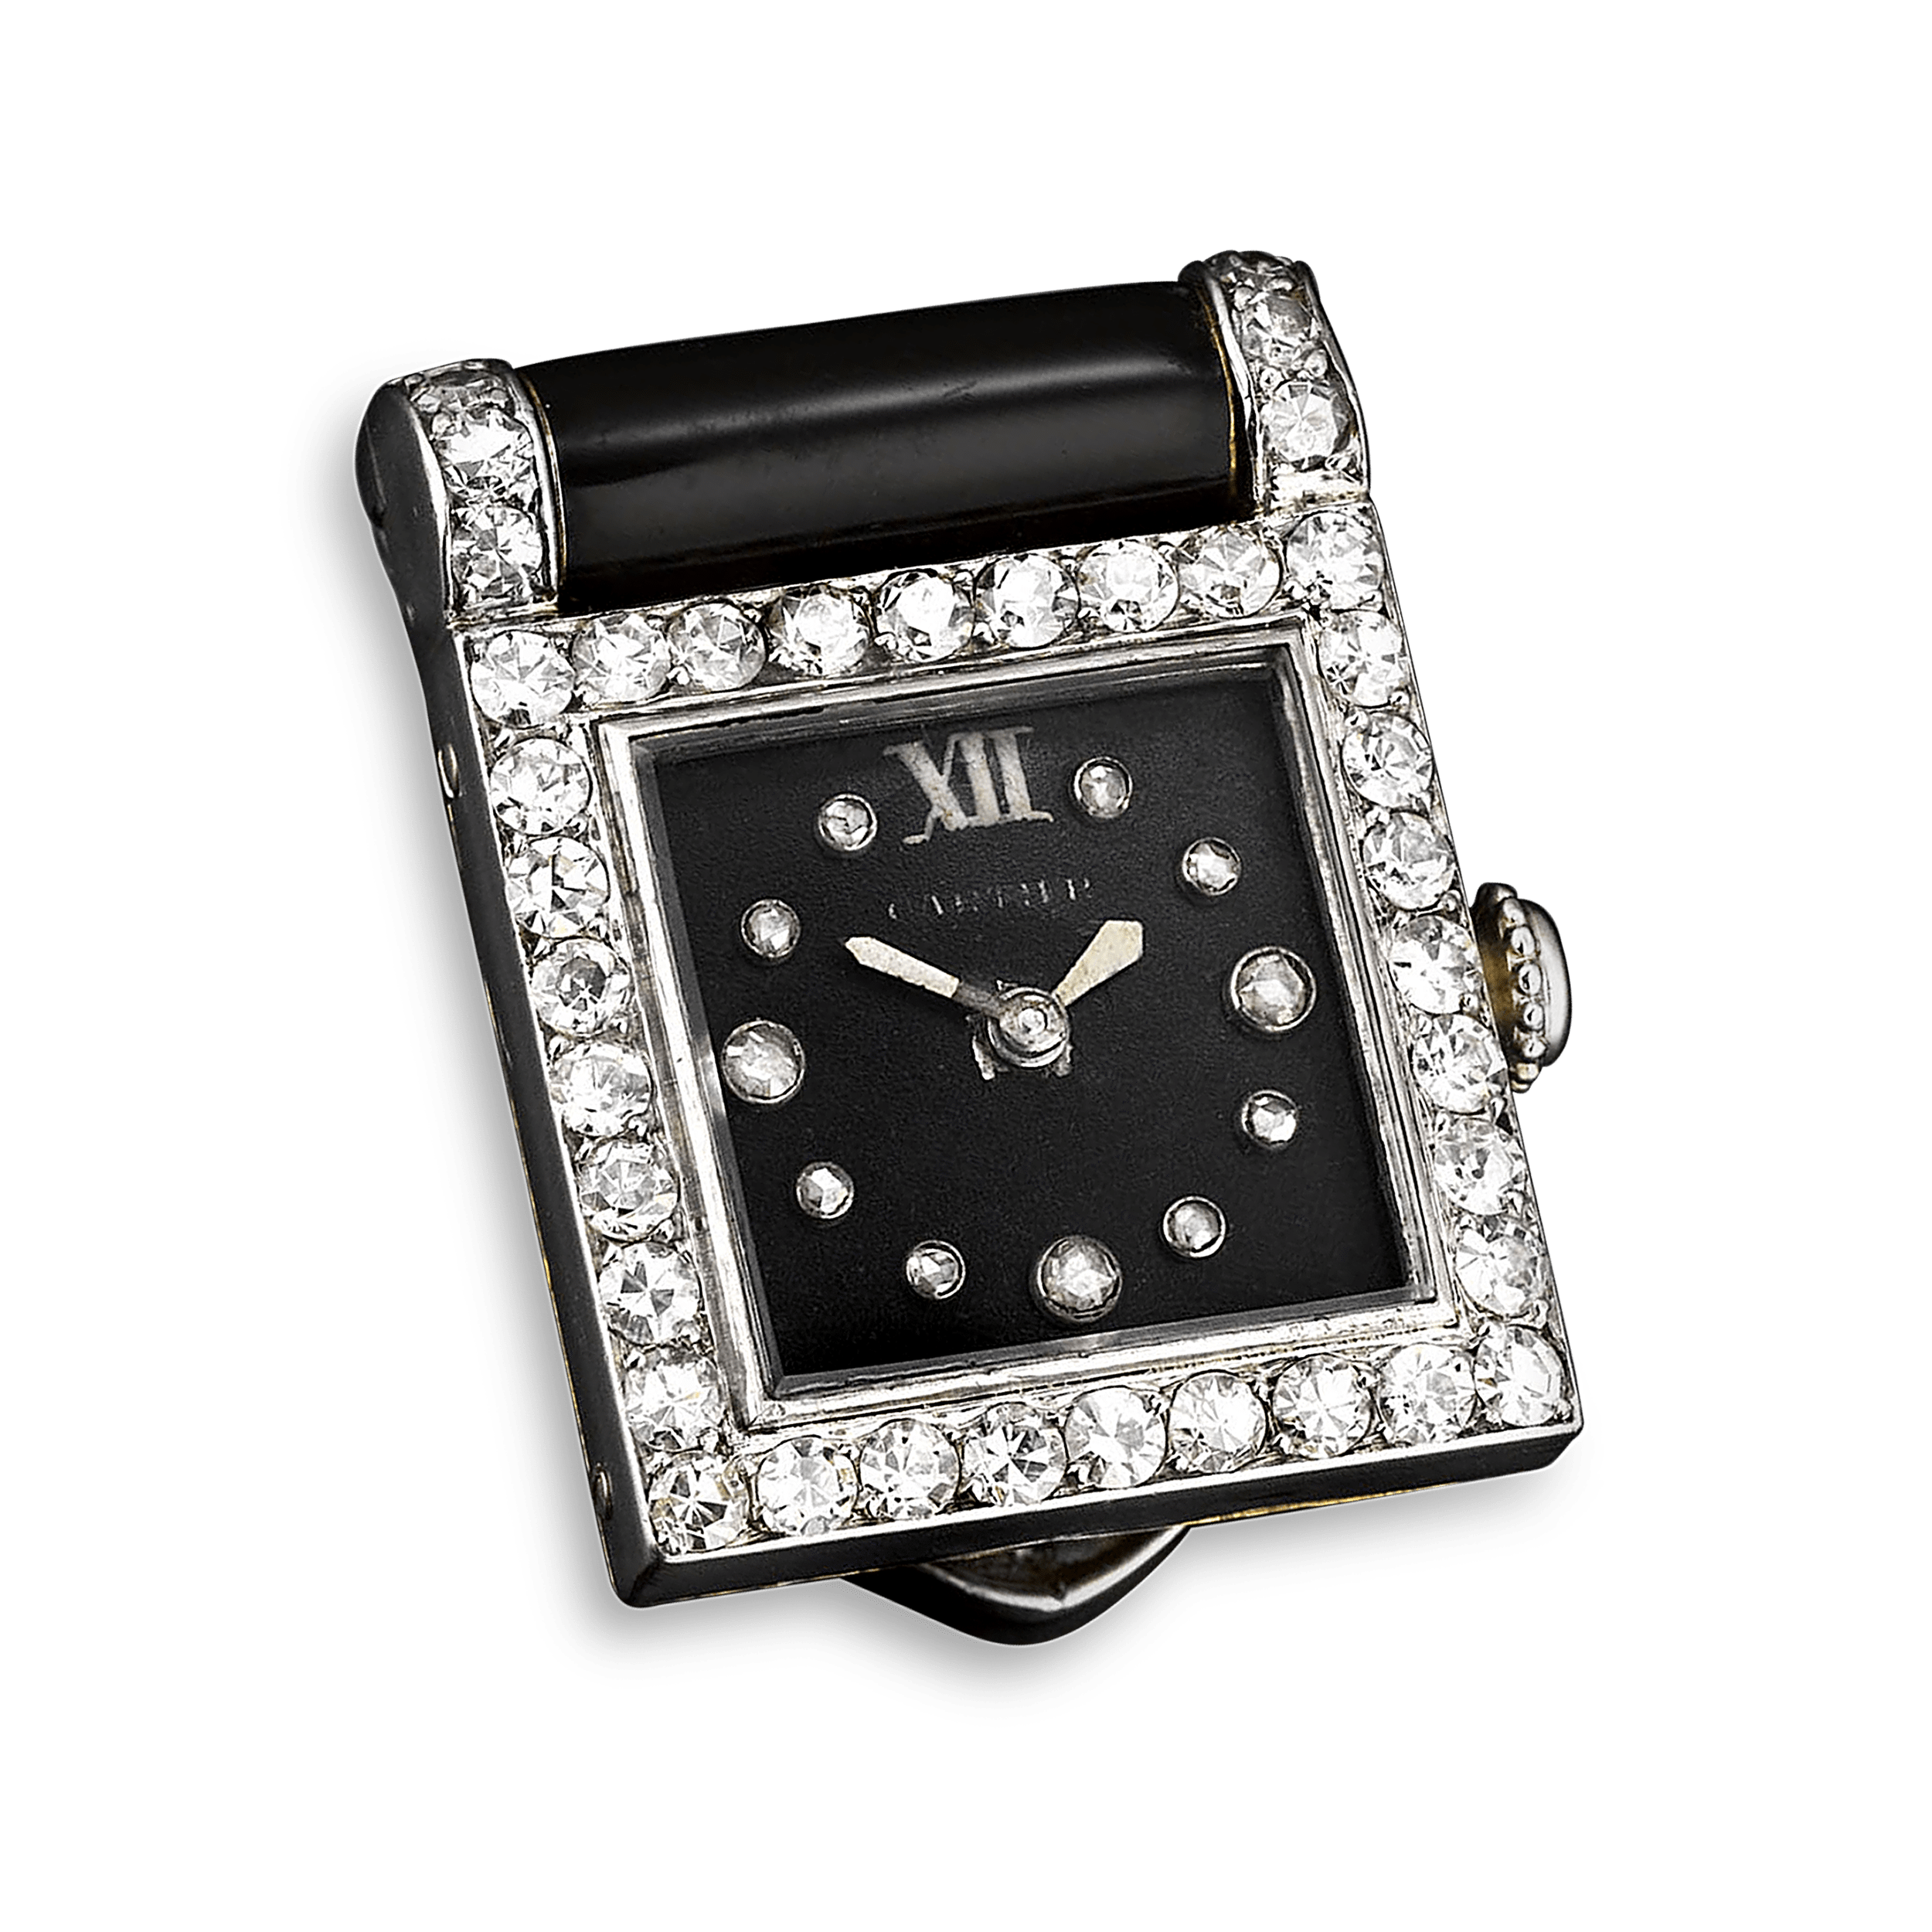 The stylish Cartier watch clip captures Art Deco artistry at its finest